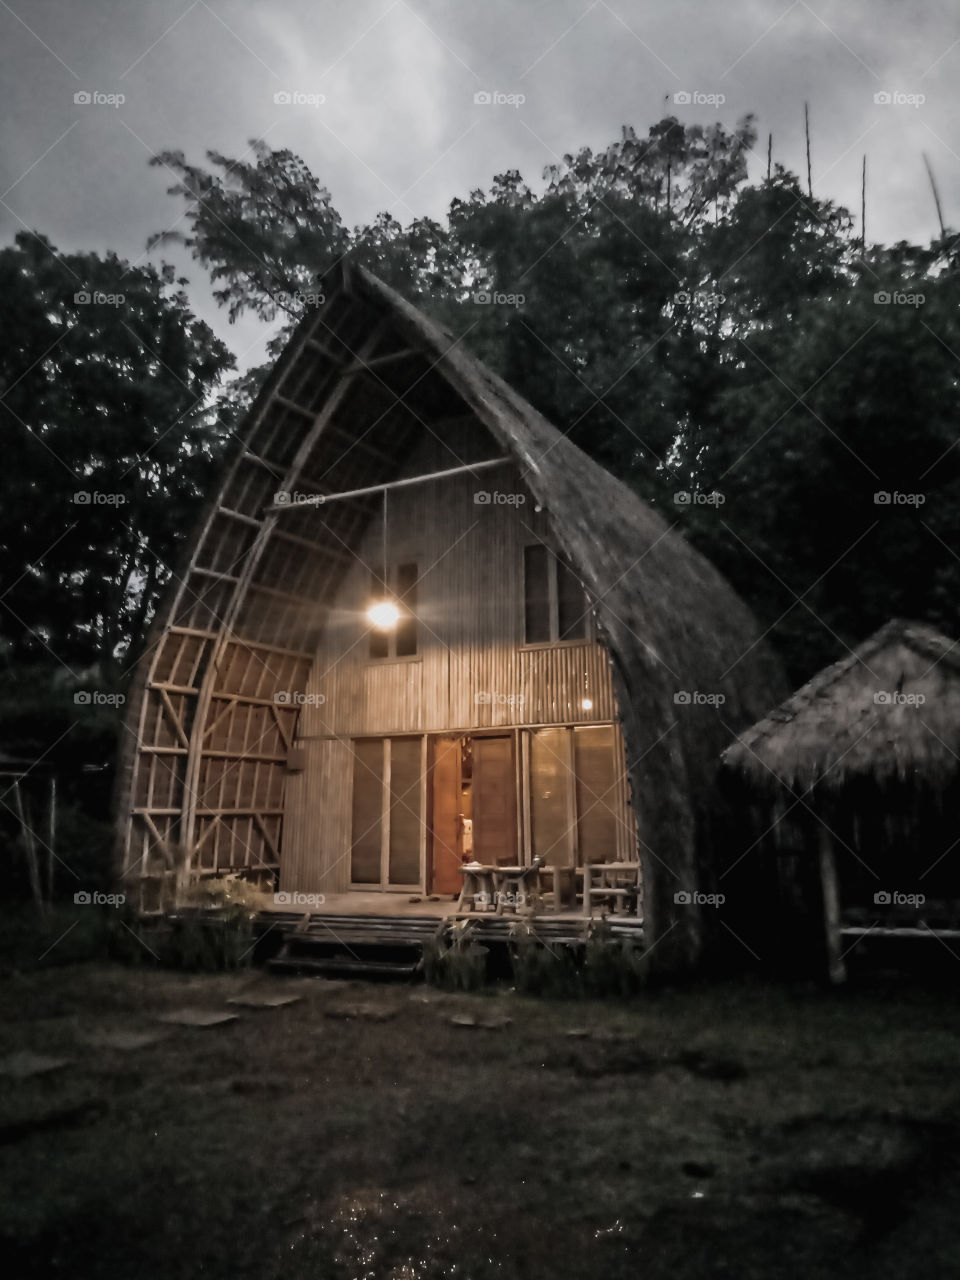 The yogyakarta bamboo house is a residential building with bamboo from the entire building